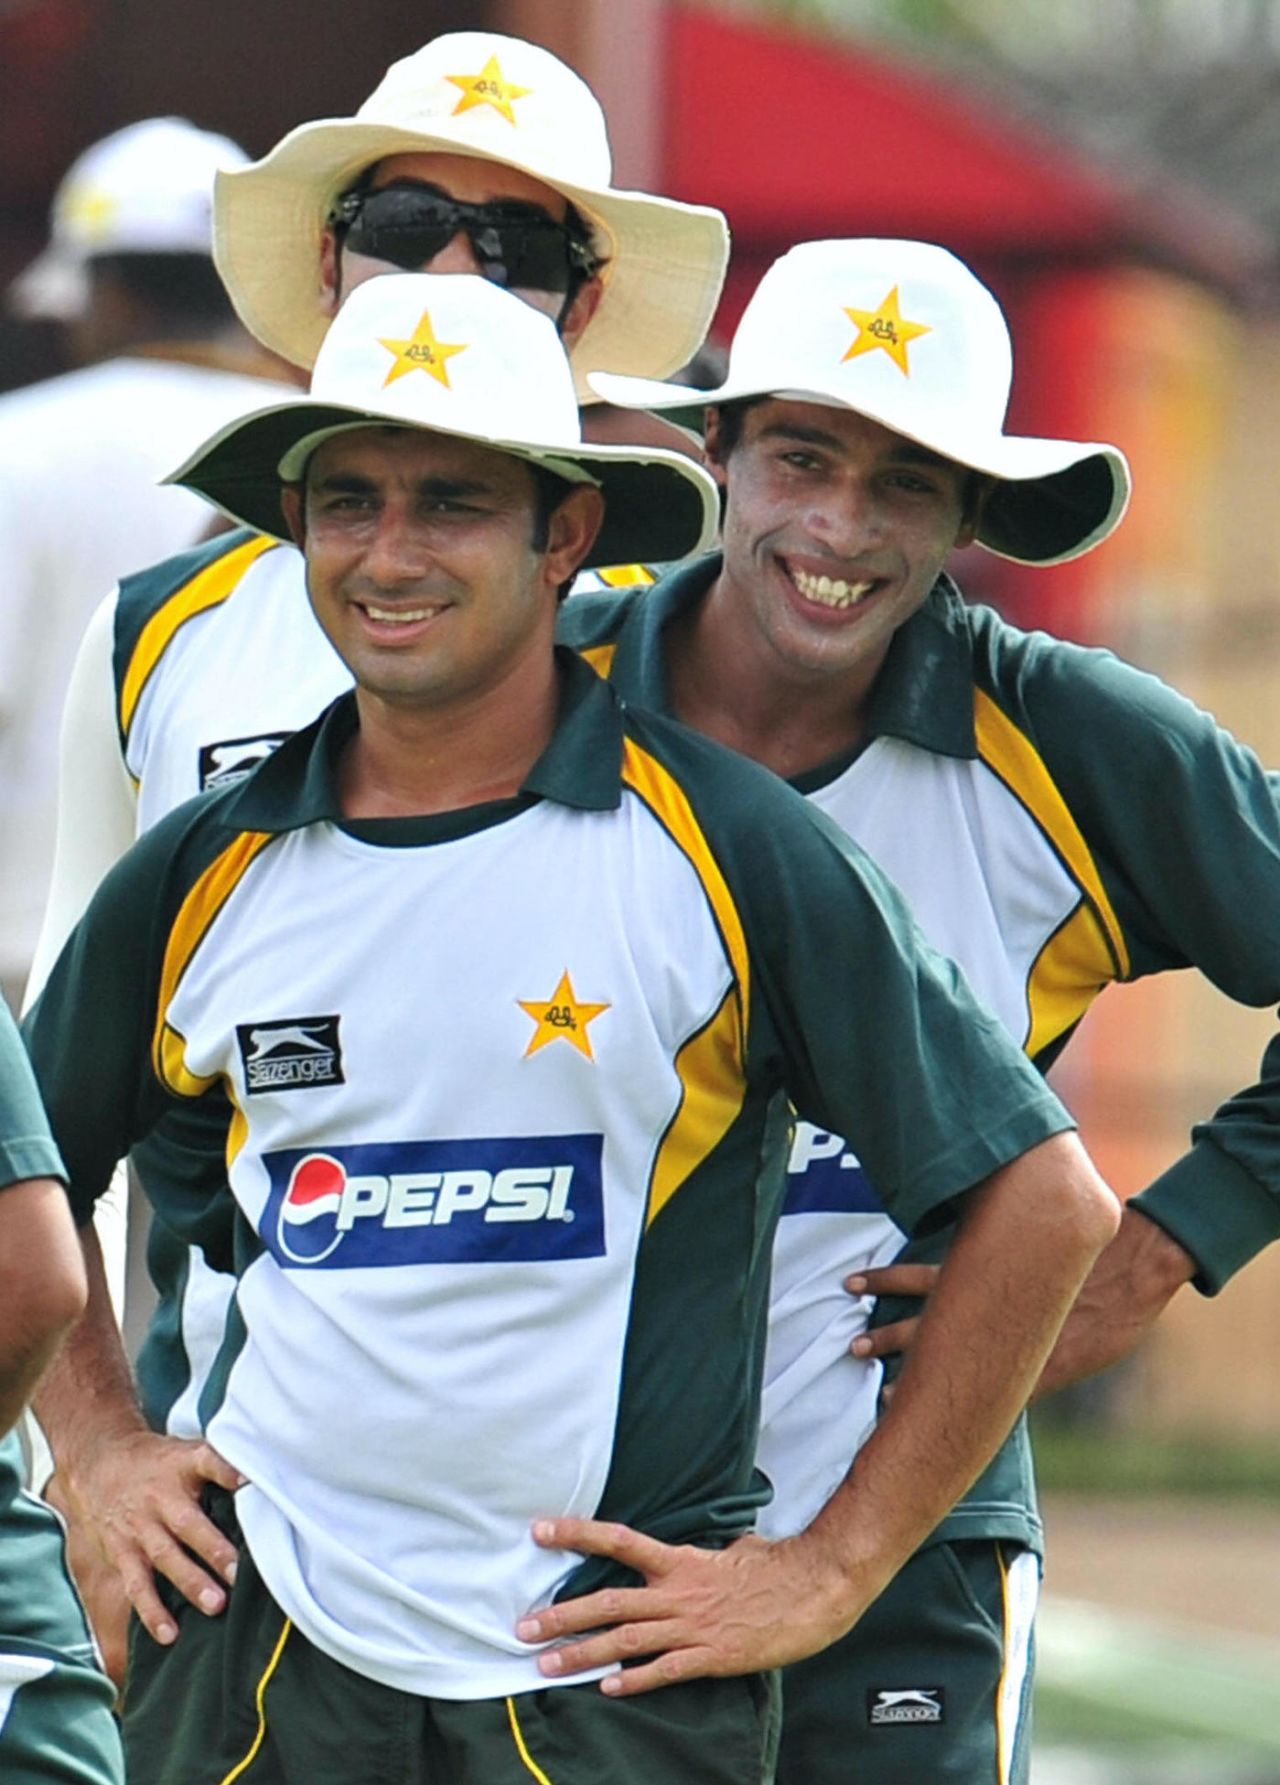 Saeed Ajmal, Mohammad Amir take part in a practice session before the first Test, Pakistan tour of Sri Lanka, P Sara Stadium, Colombo, July 11, 2009